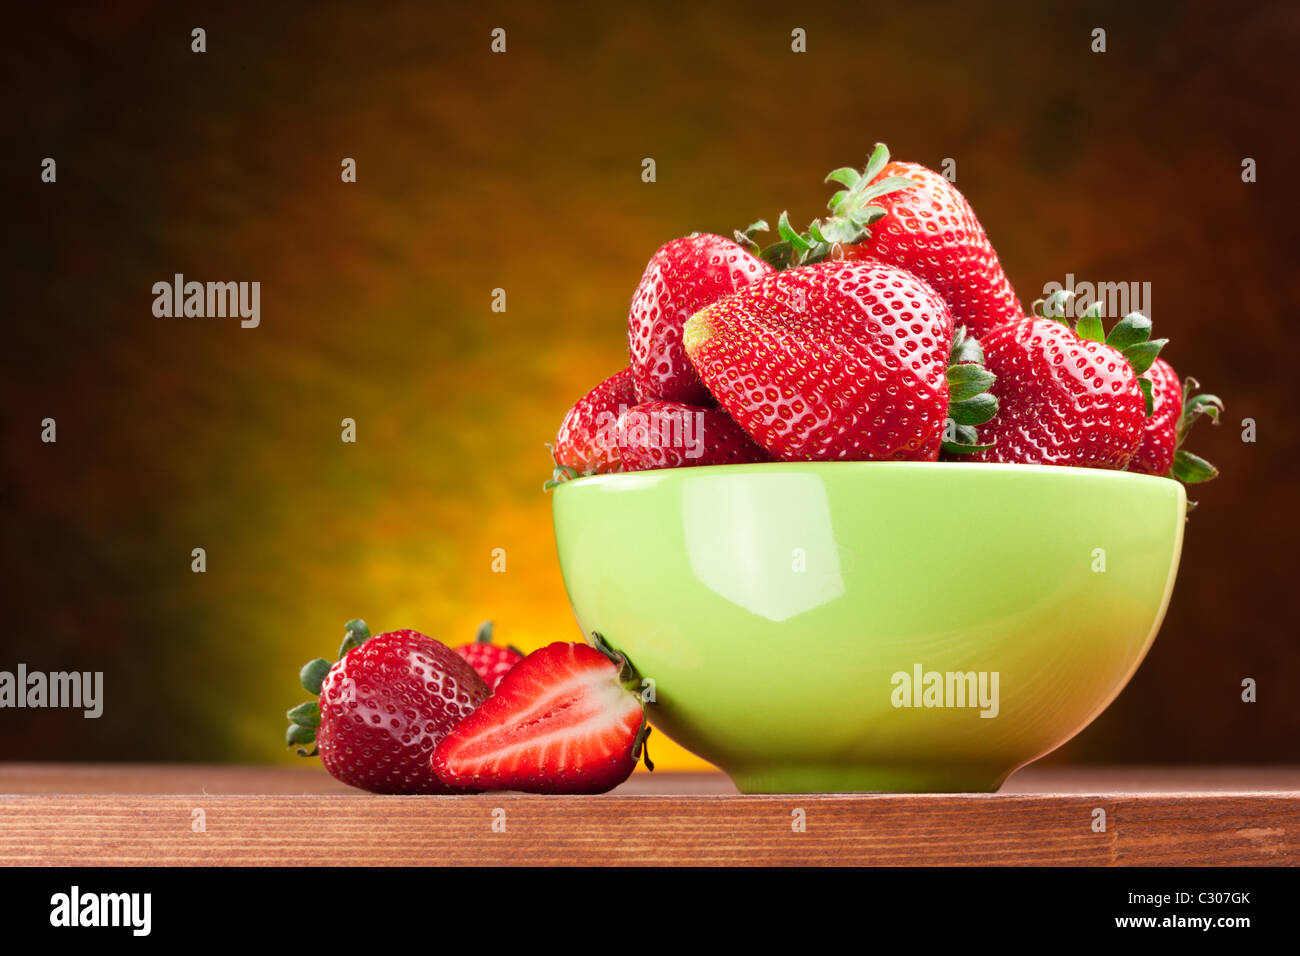 Appetizing strawberry in the bowl. Isolated on a white background. Stock Photo